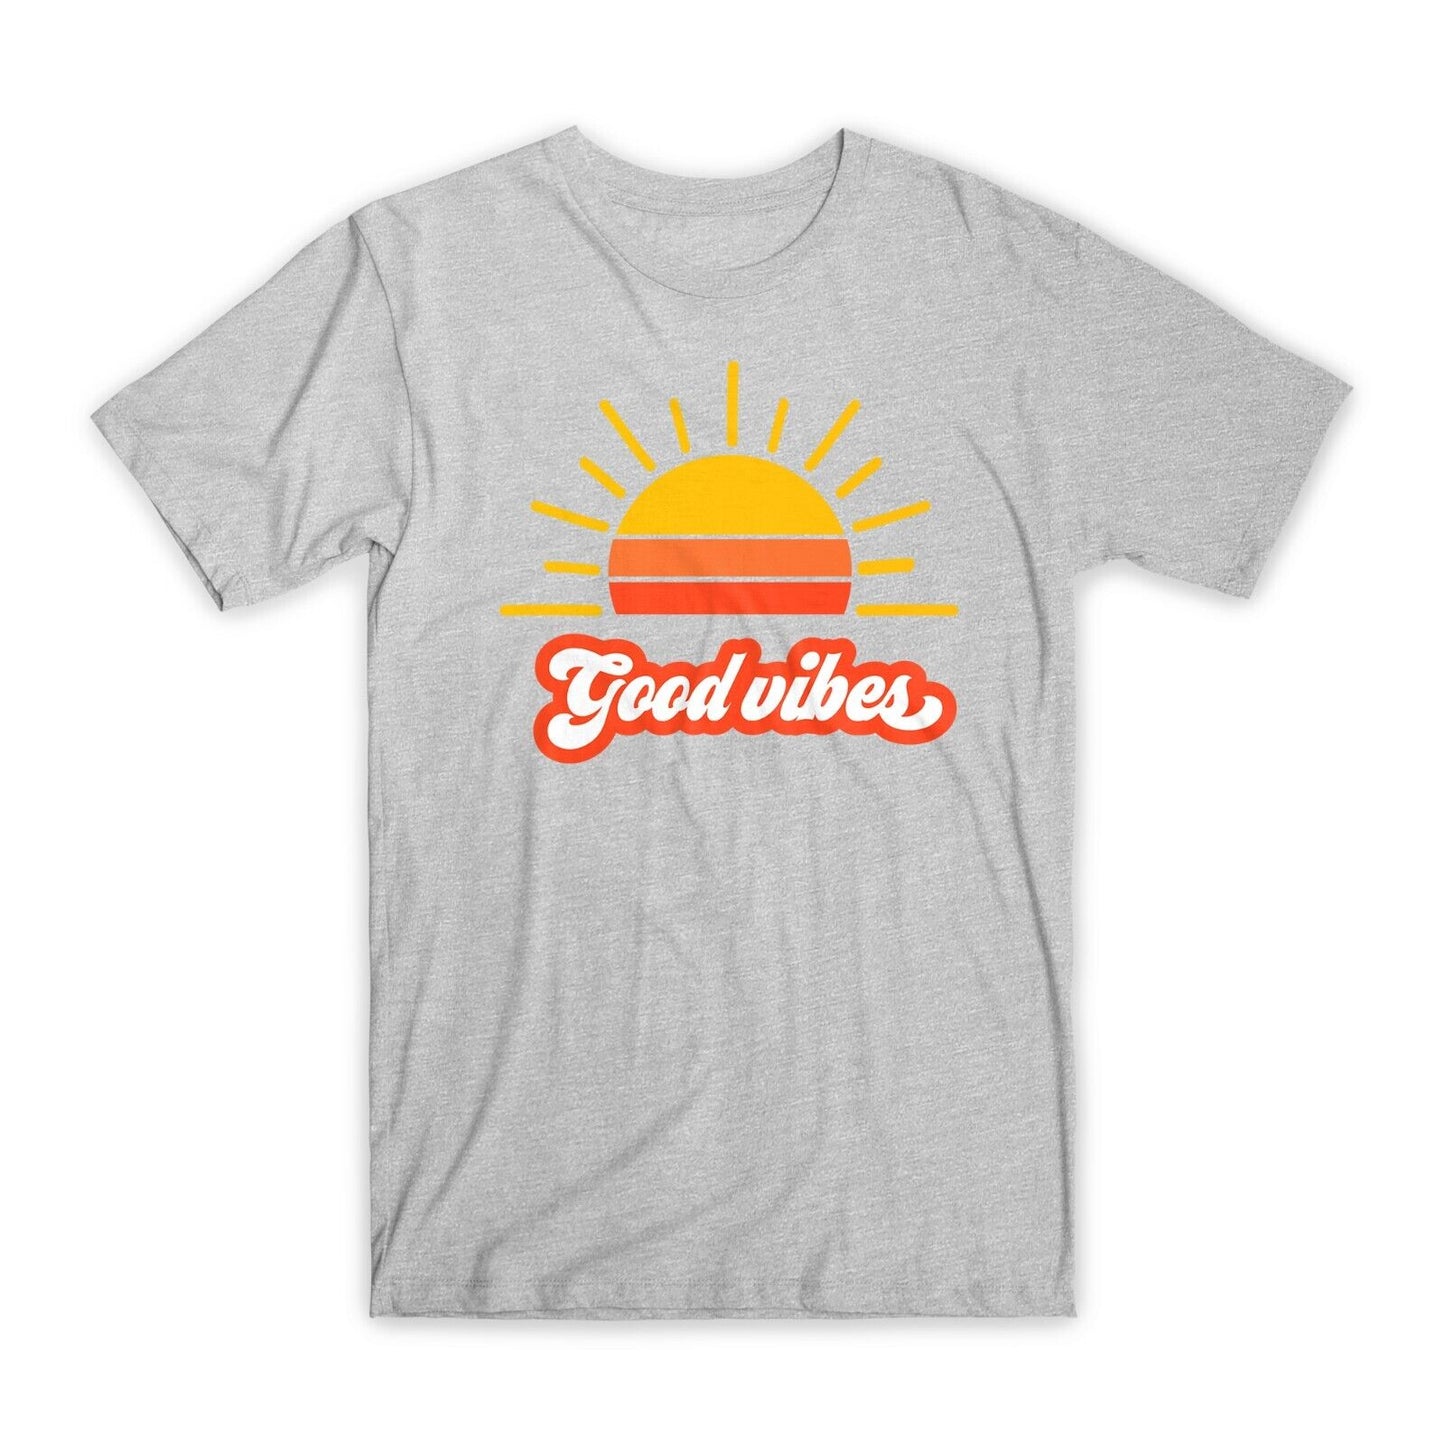 Good Vibes Sun T-Shirt Premium Soft Cotton Crew Neck Funny Tees Novelty Gift NEW